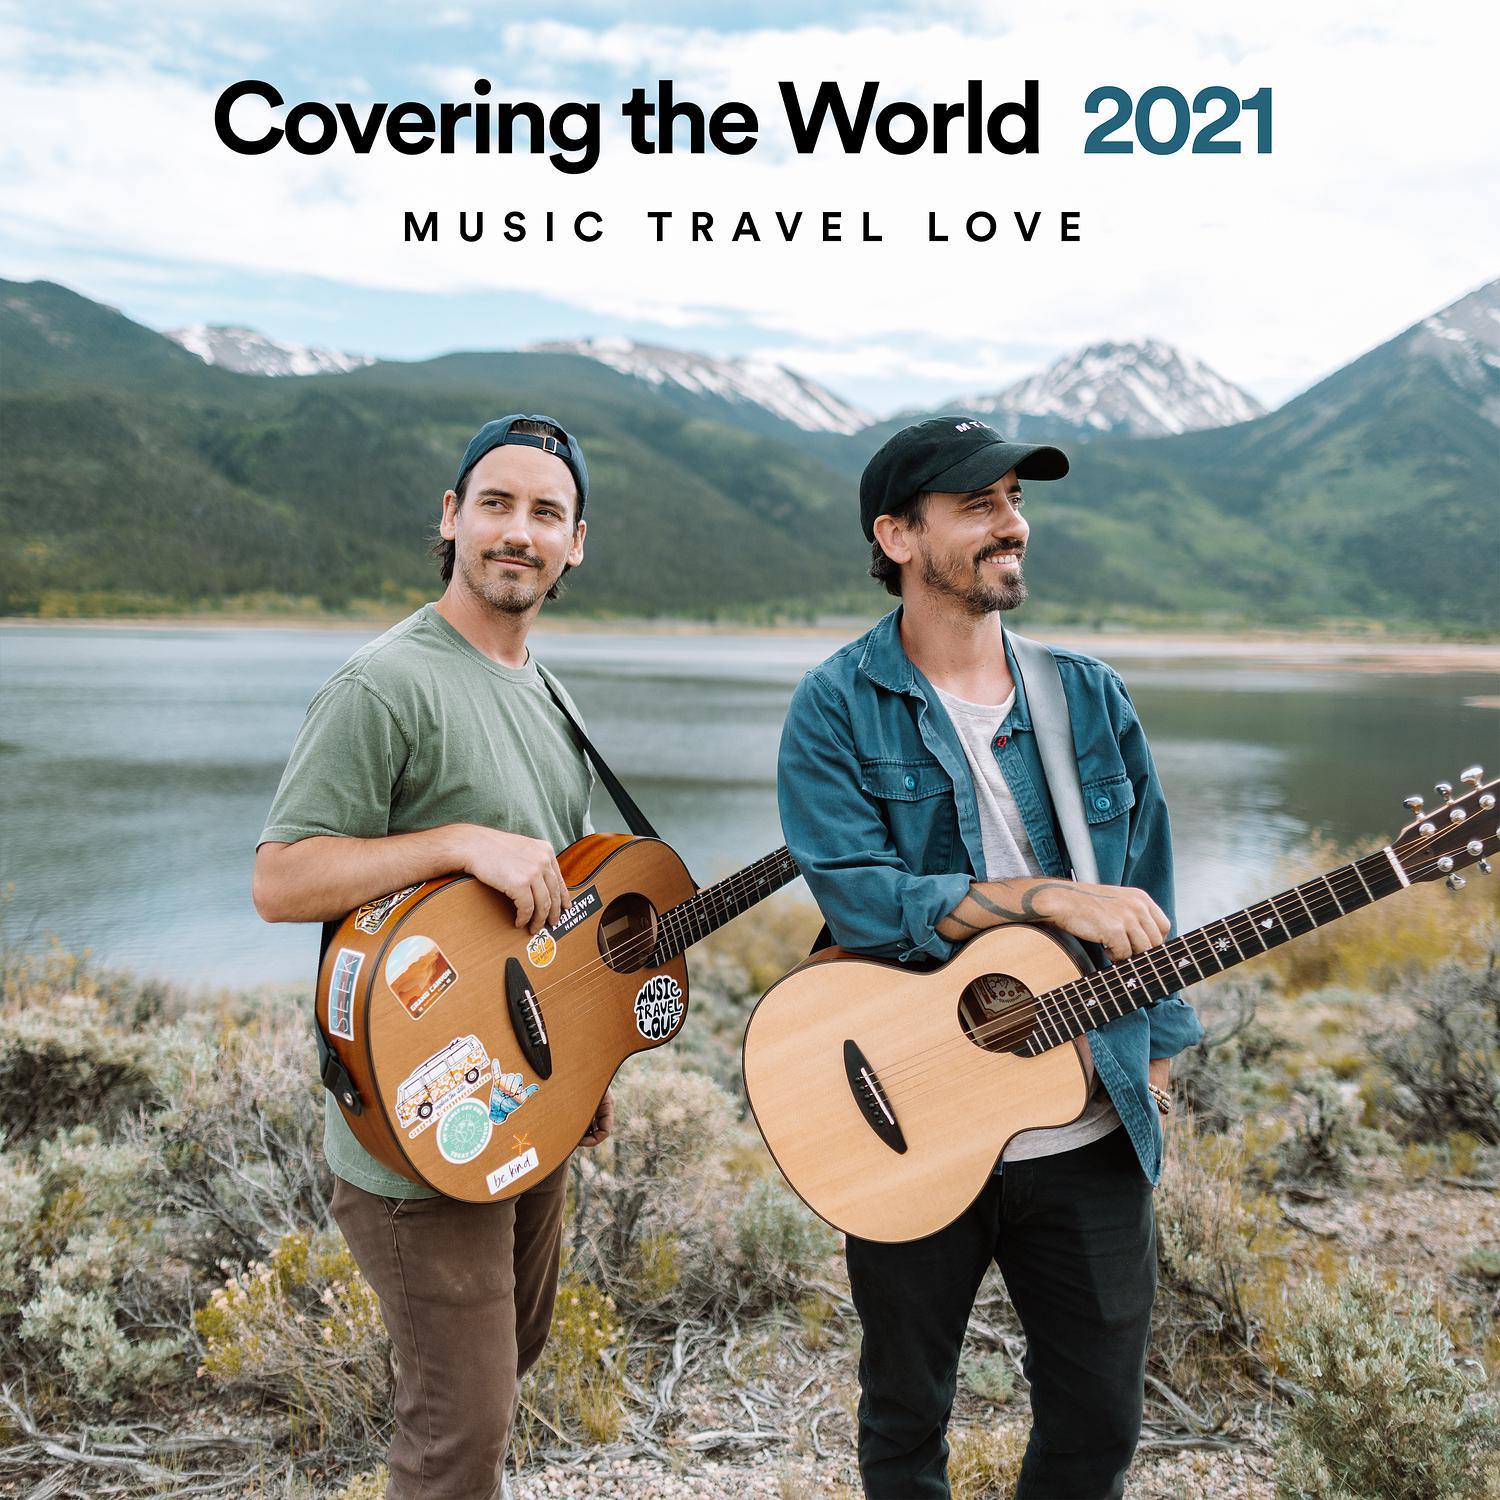 Music Travel Love - Can't Help Falling in Love